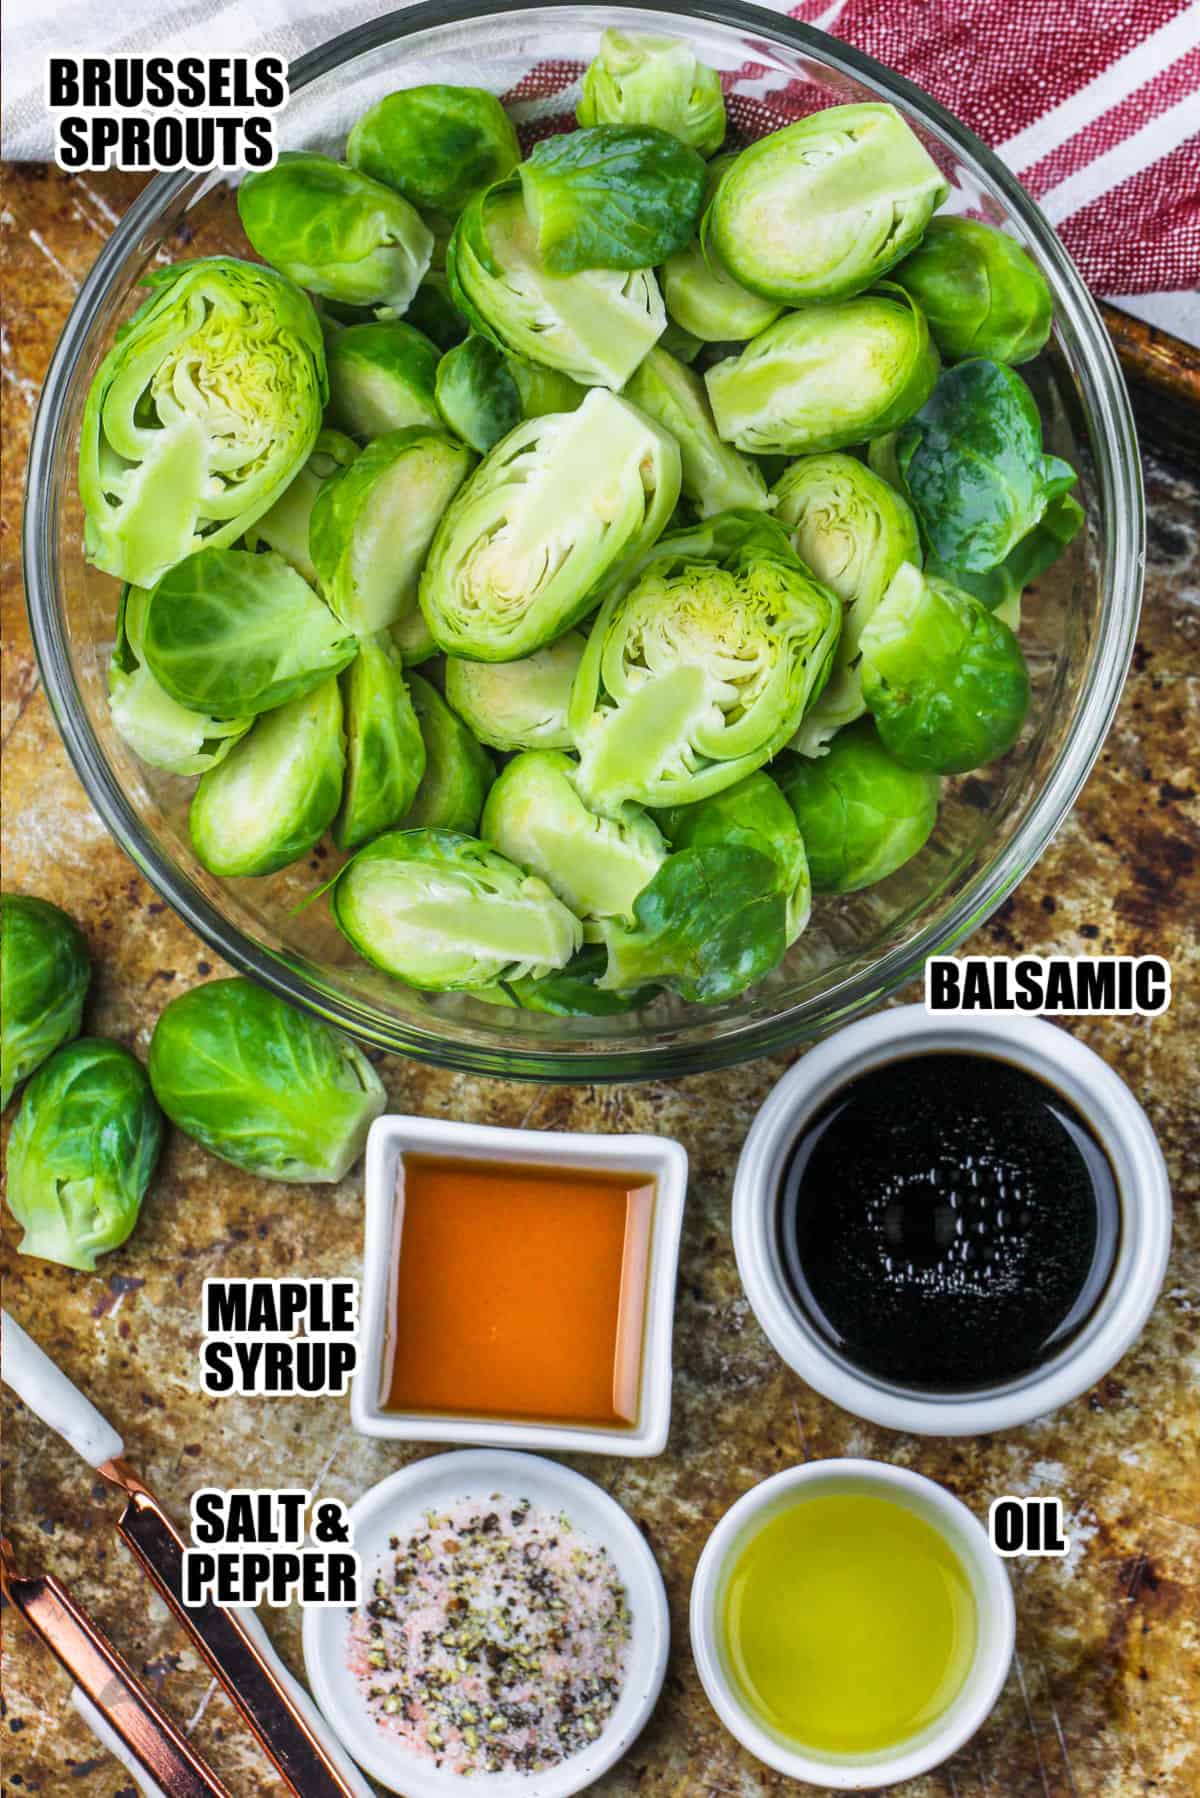 brussels, maples syrup, balsamic vinegar, oil, salt and pepper assembled to make balsamic brussels sprouts